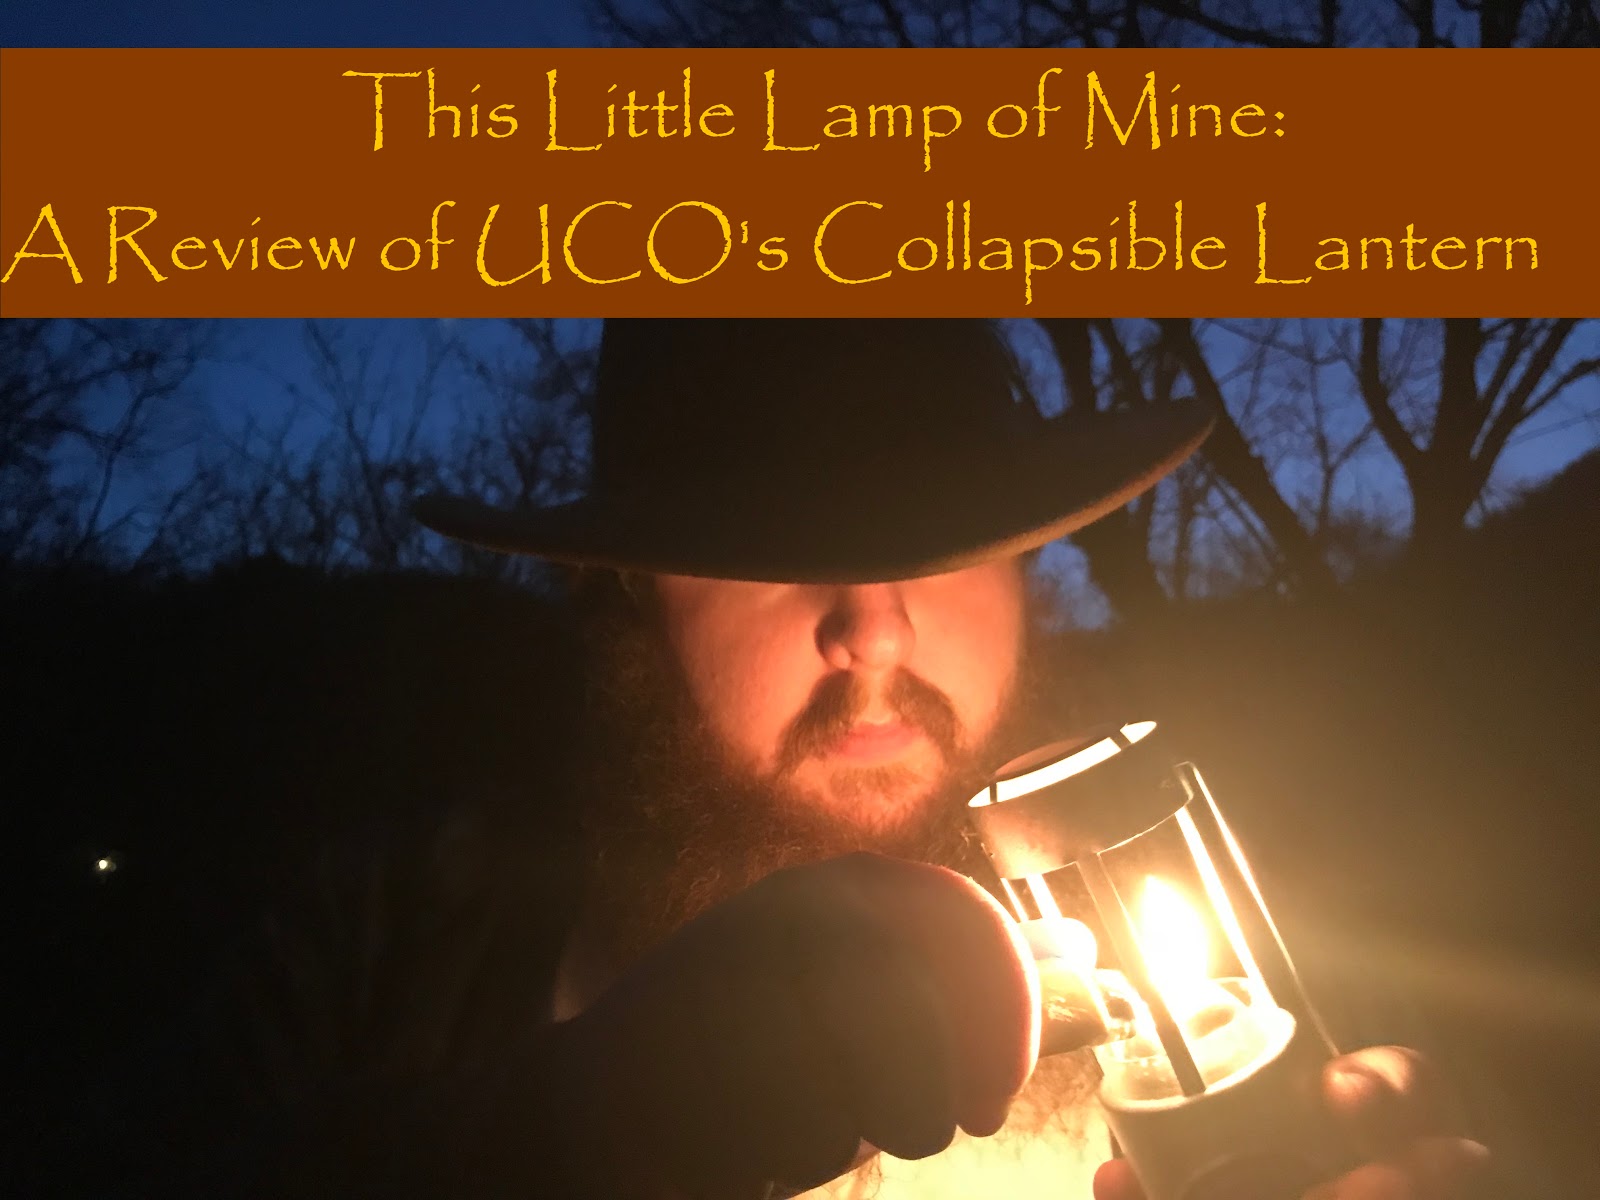 The PROBLEM With The Original Candle Lantern From UCO 